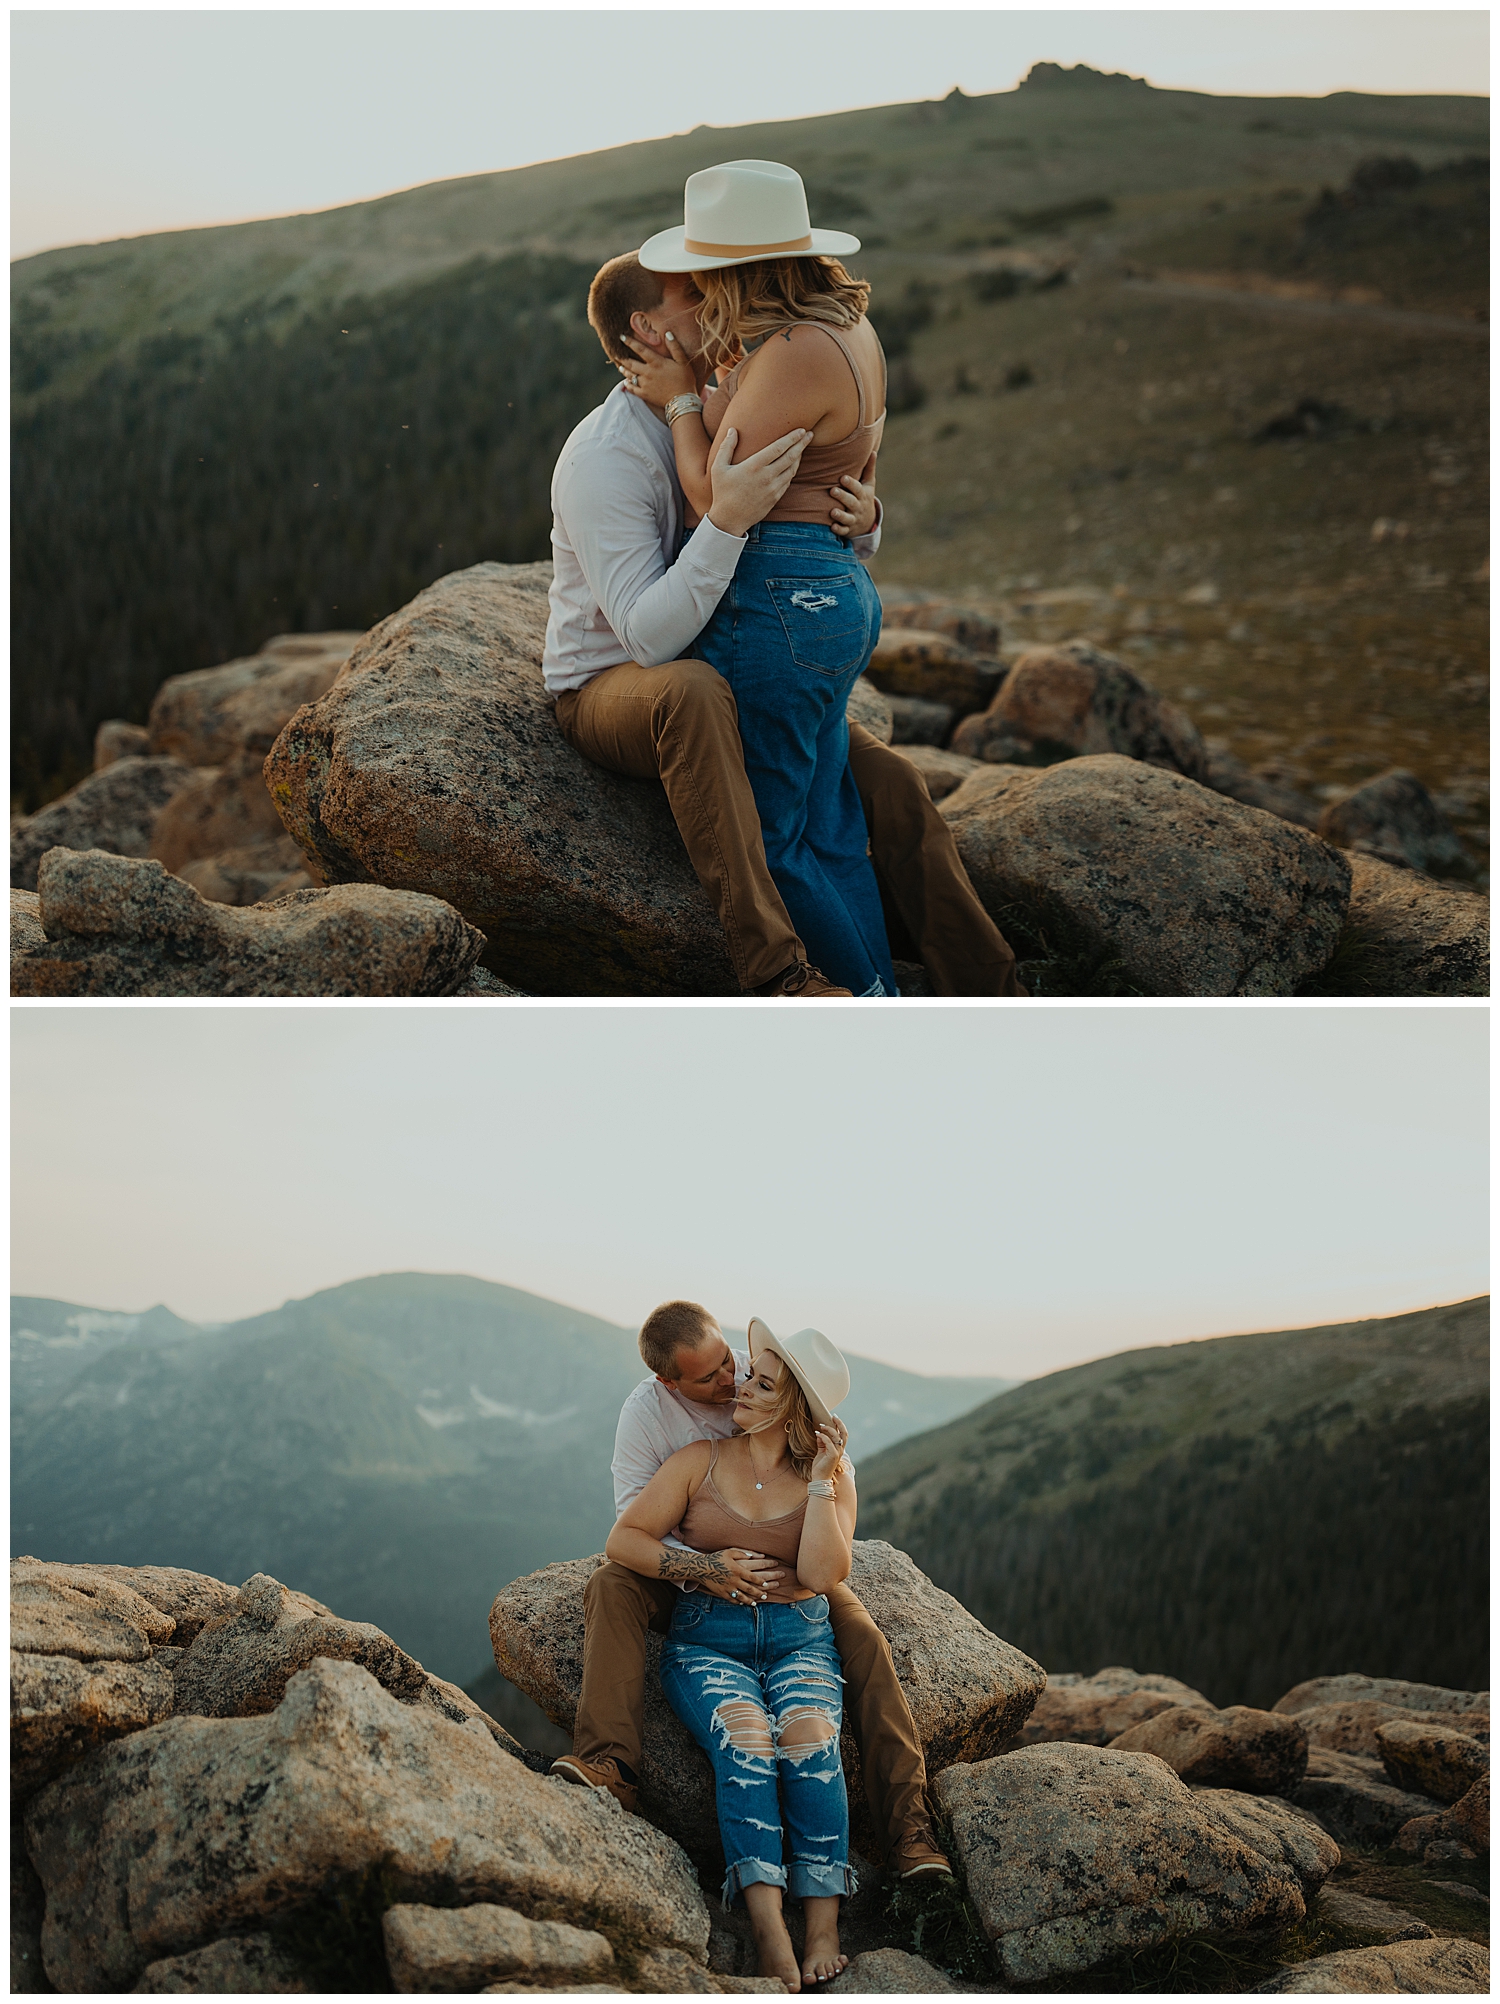 Couple in the Rocky Mountain National Park posed near a rock